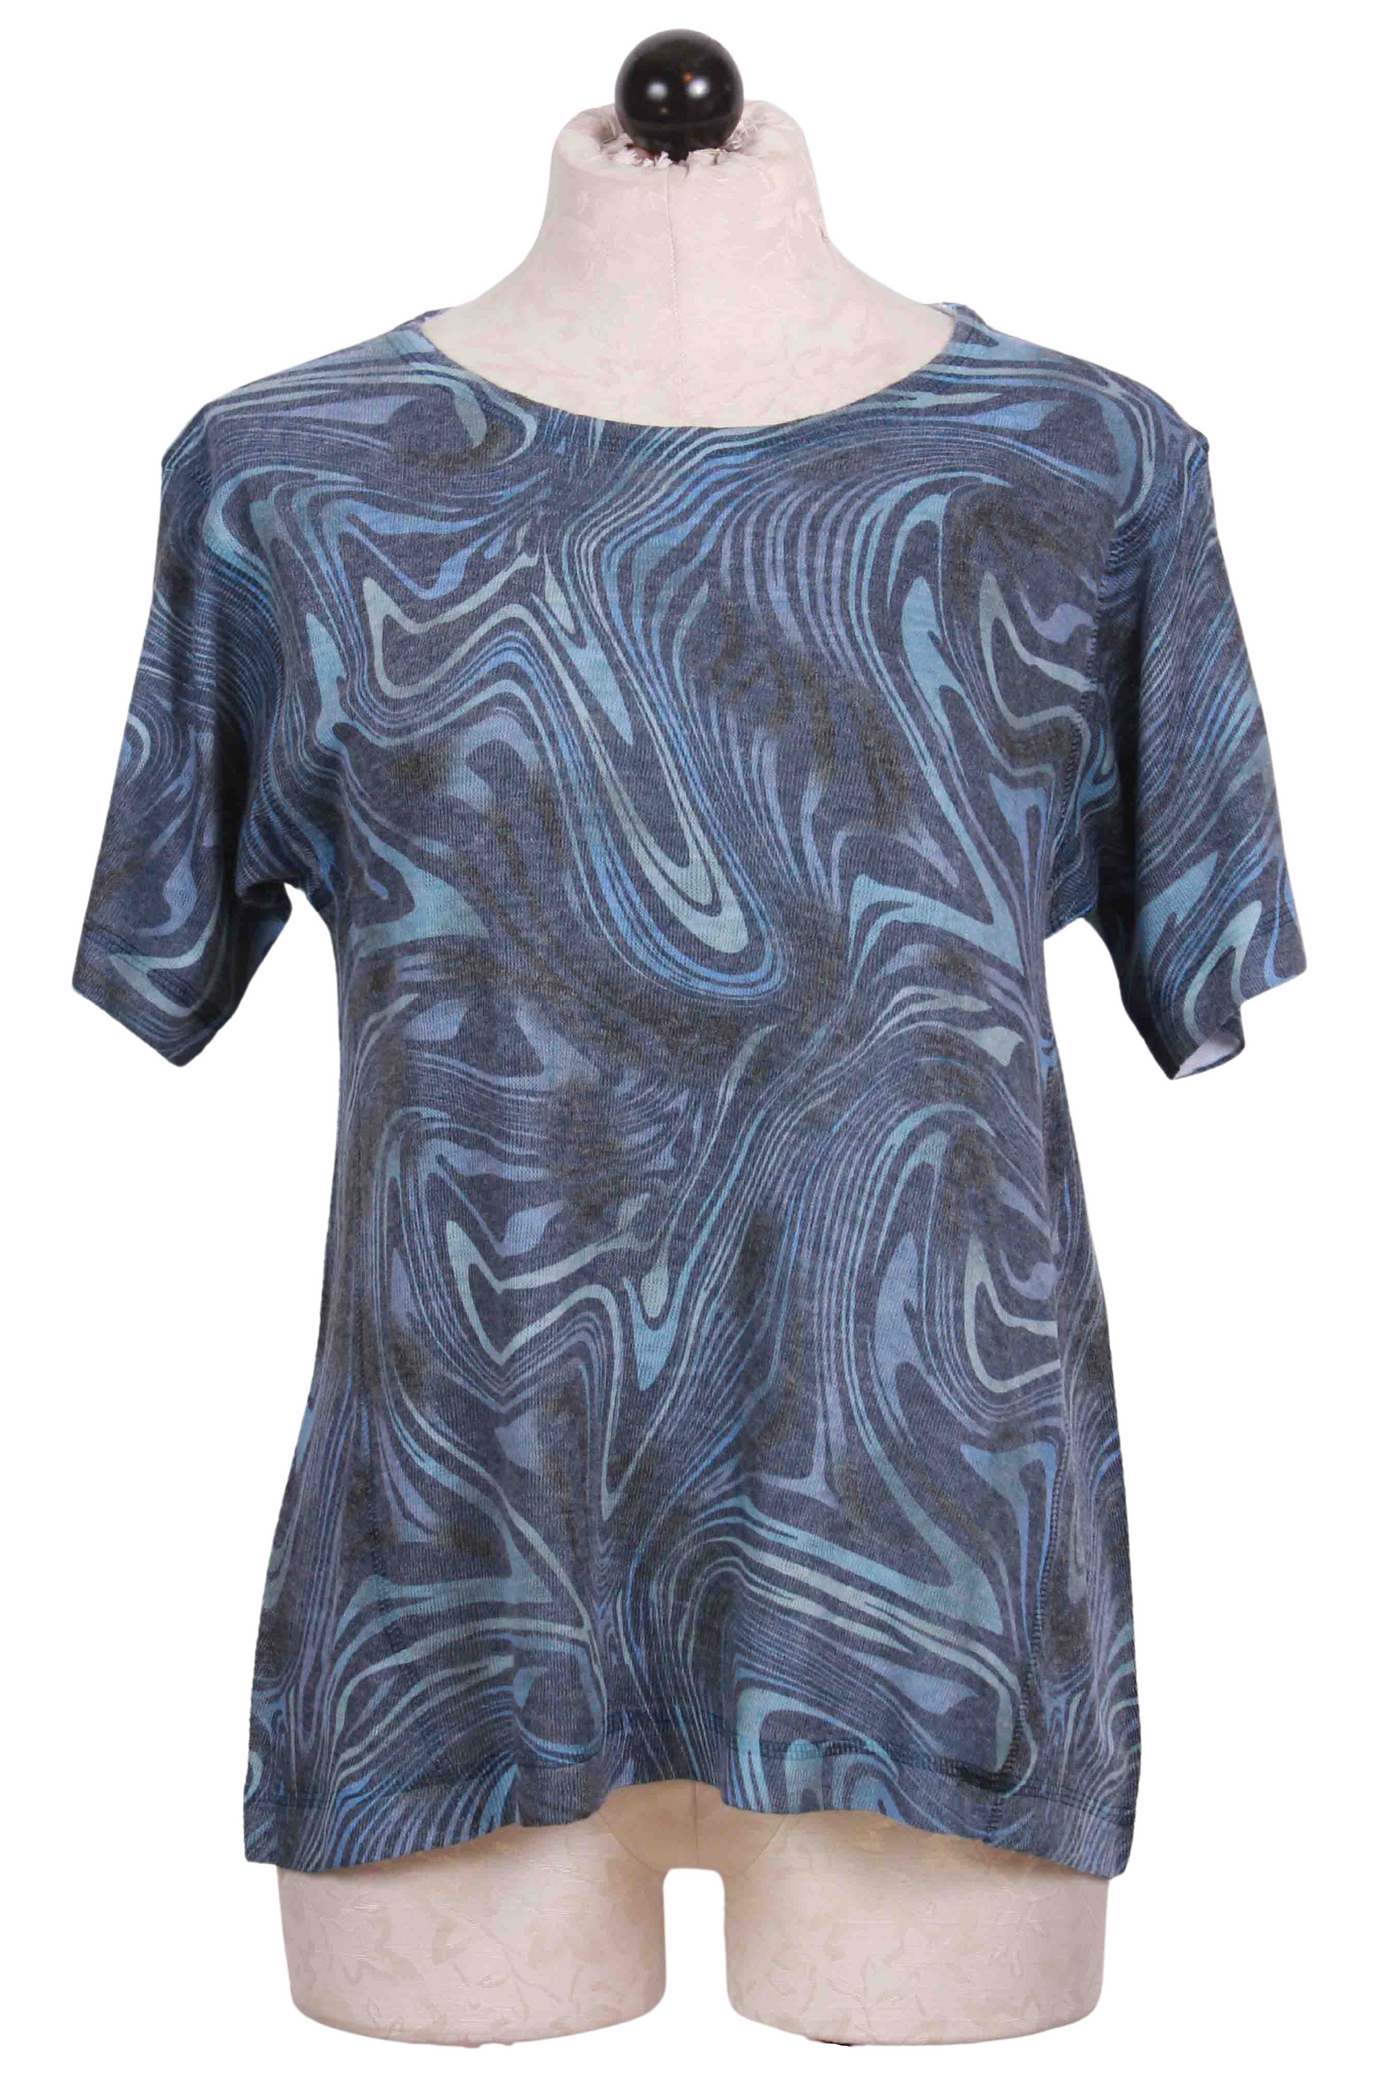 Short Sleeve Mixed Navy Swirl Patterned Top by Nally and Millie